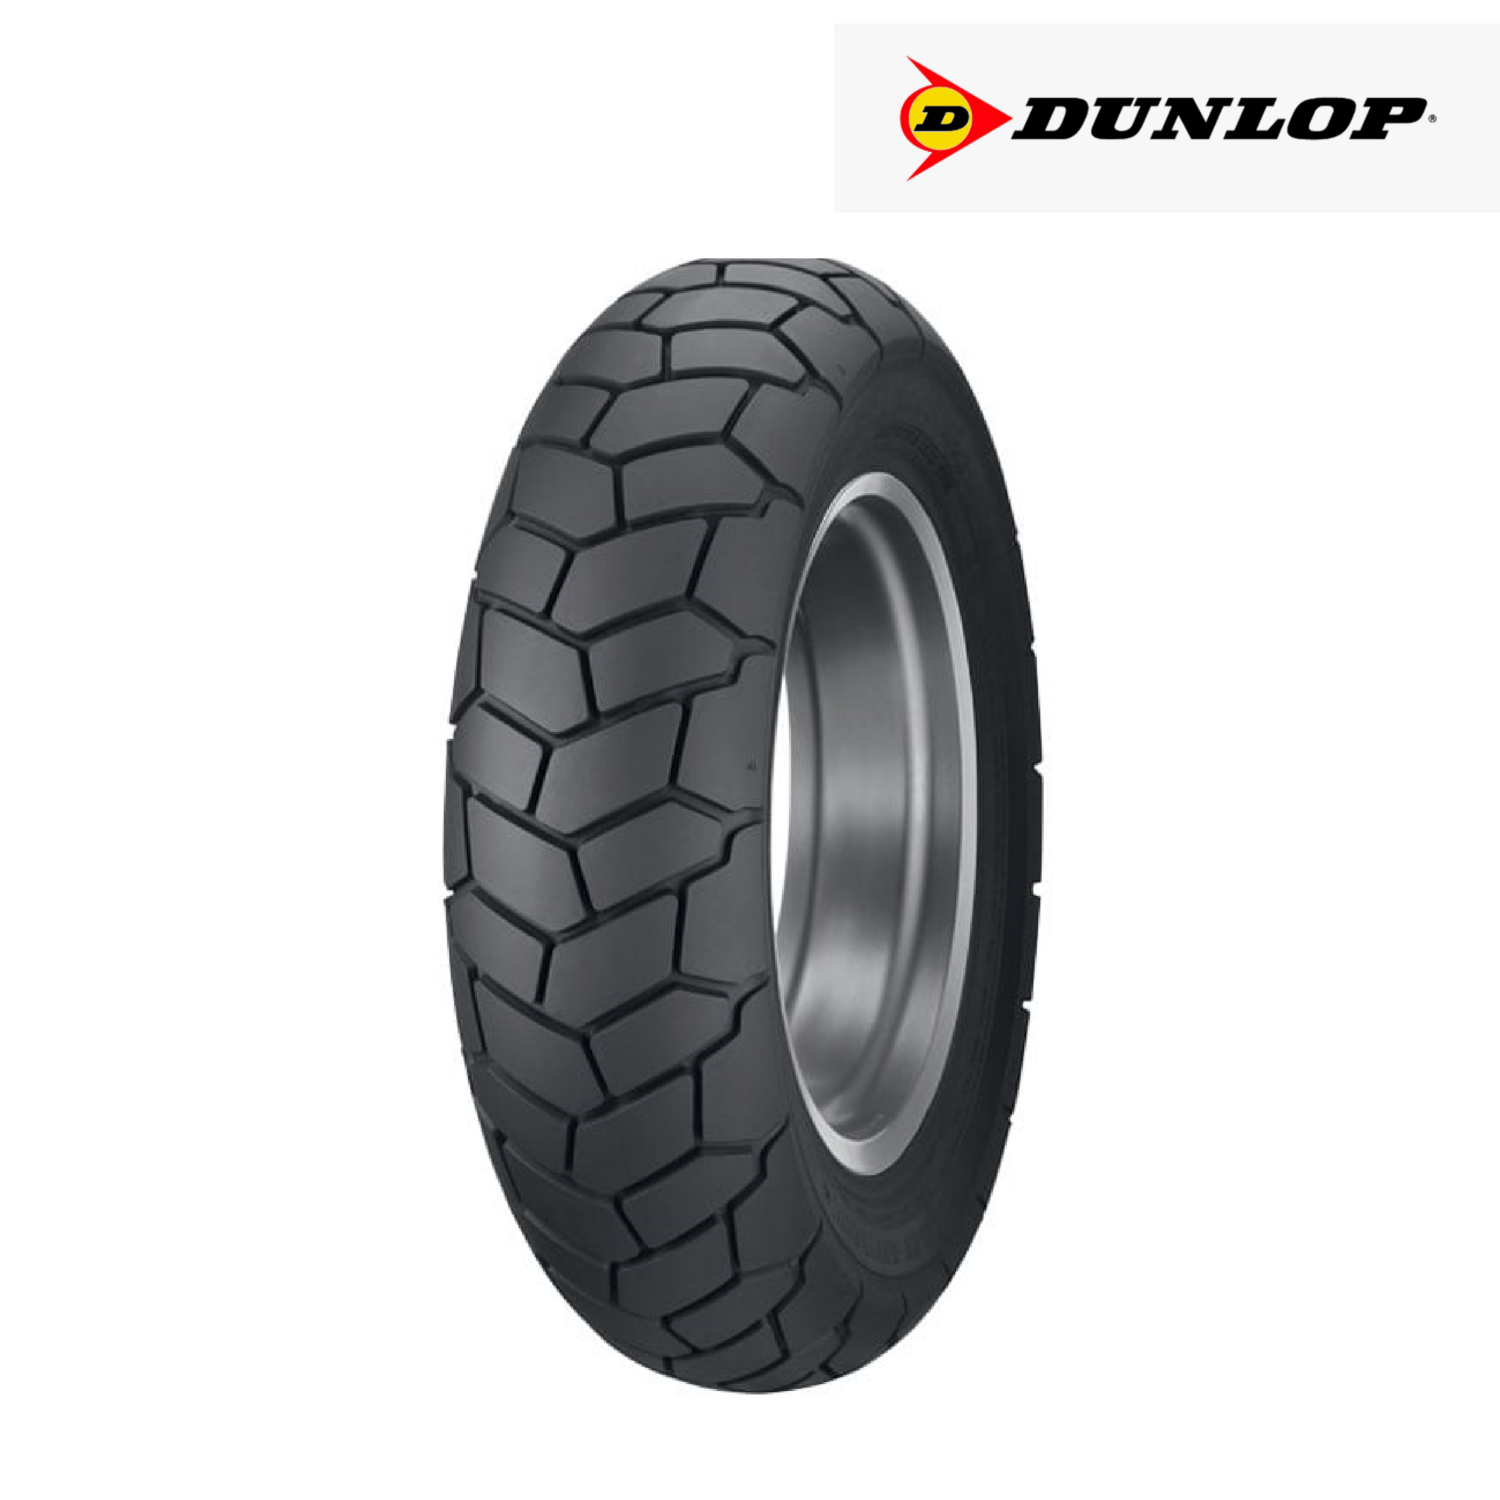 DUNLOP D429 150/80-16 Tubeless 71 H Front Two-Wheeler Tyre